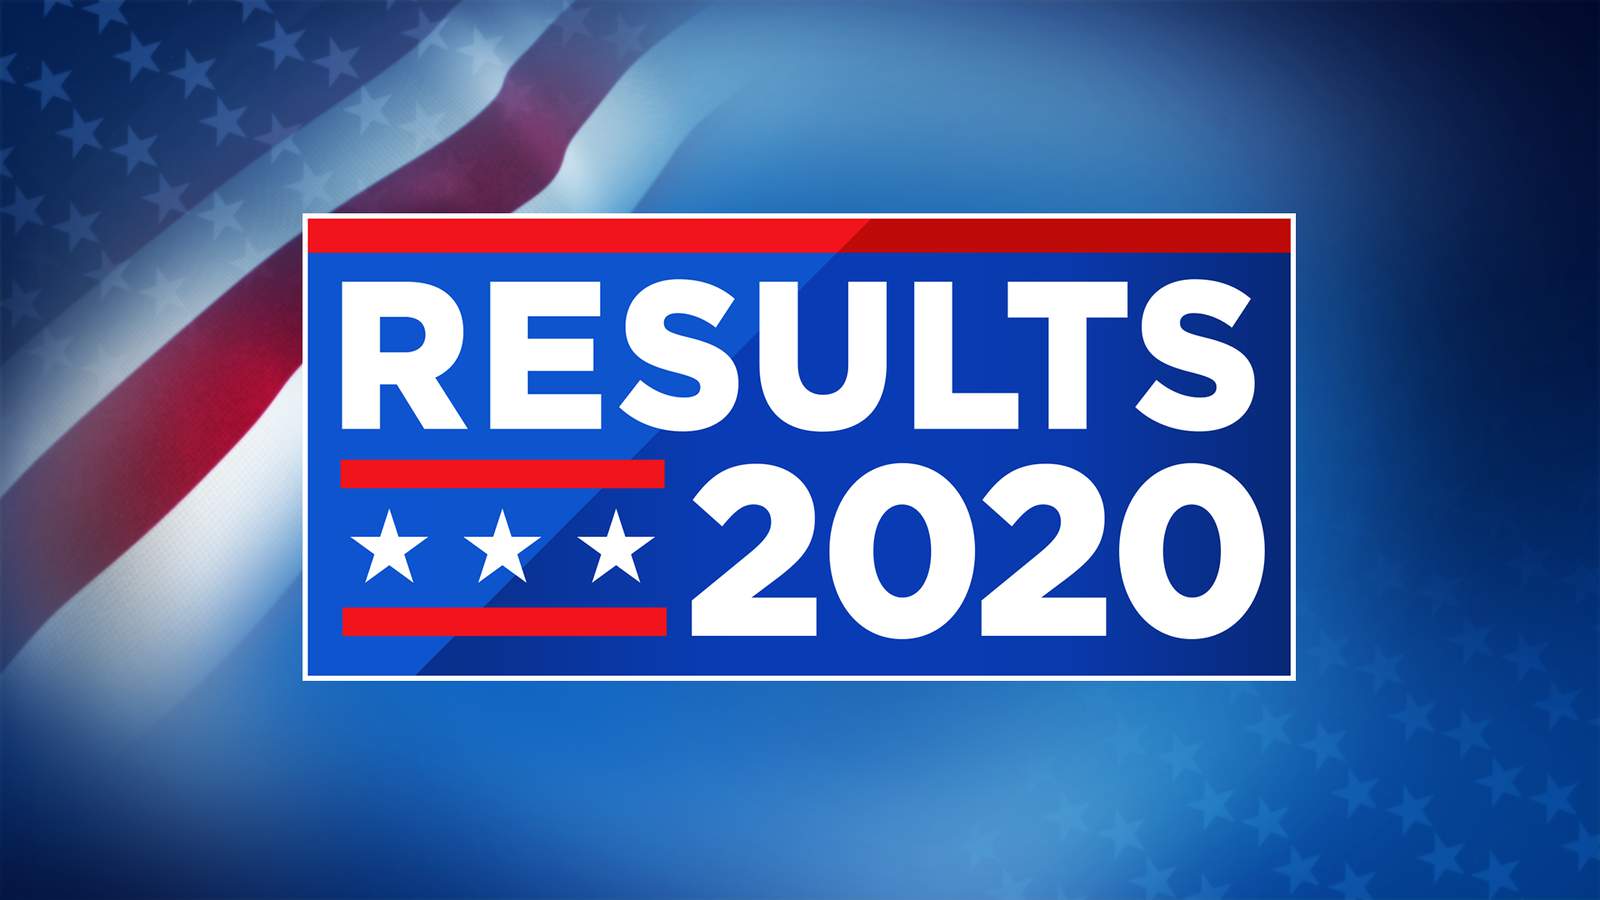 Florida General Election Results for Lake County on Nov. 3, 2020